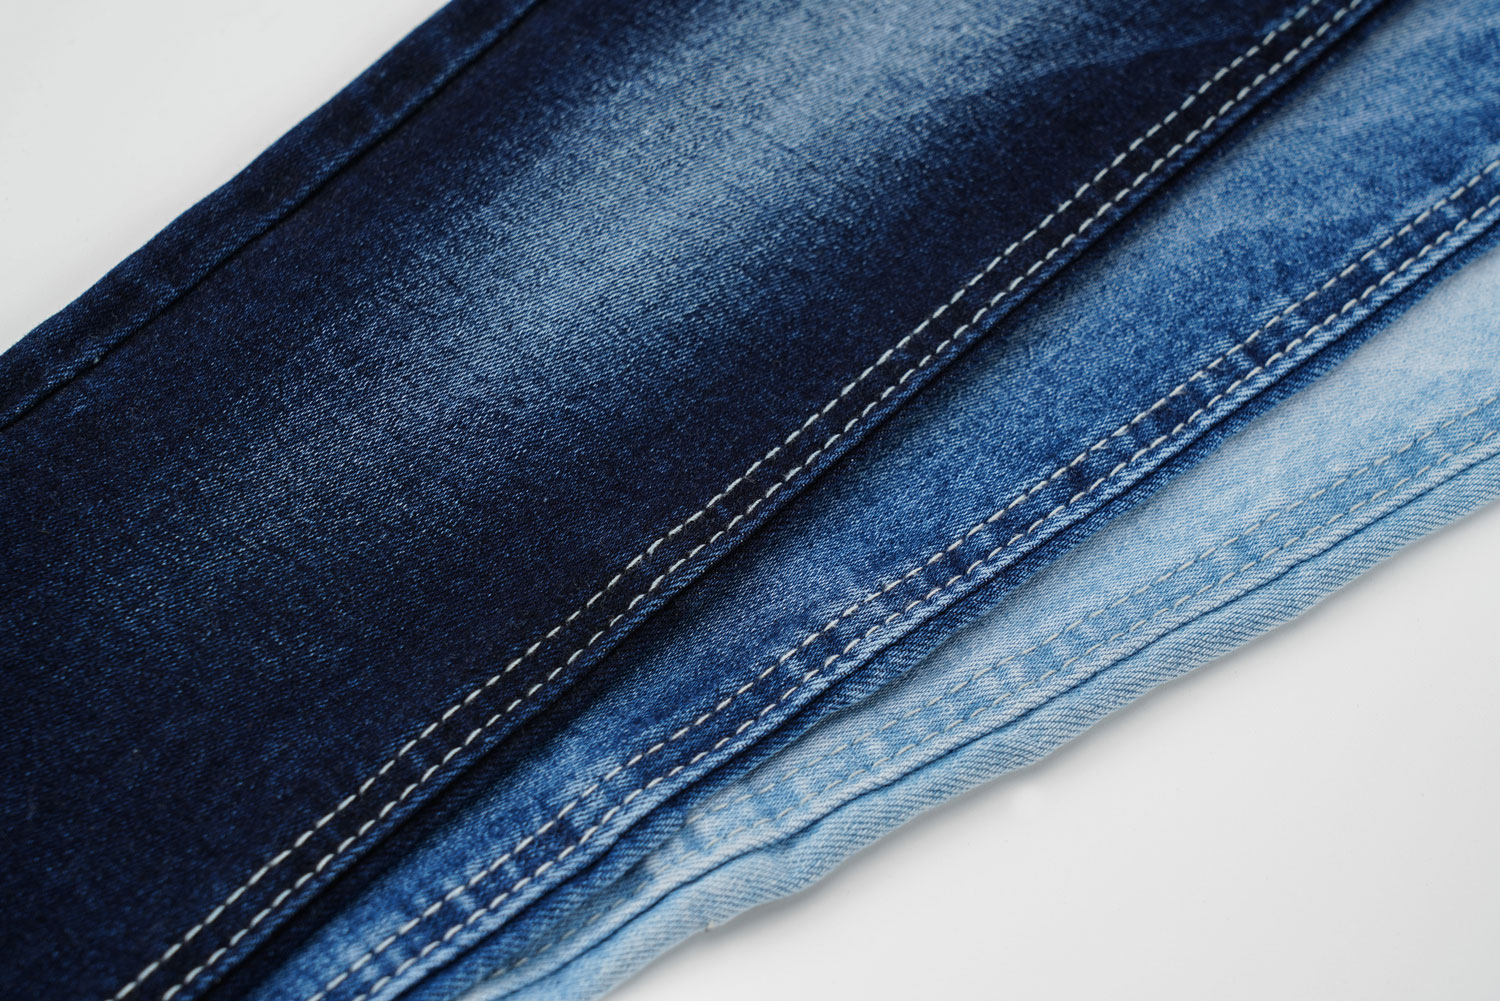 Tips and Methods to Keep Your Quality Denim Clean 2